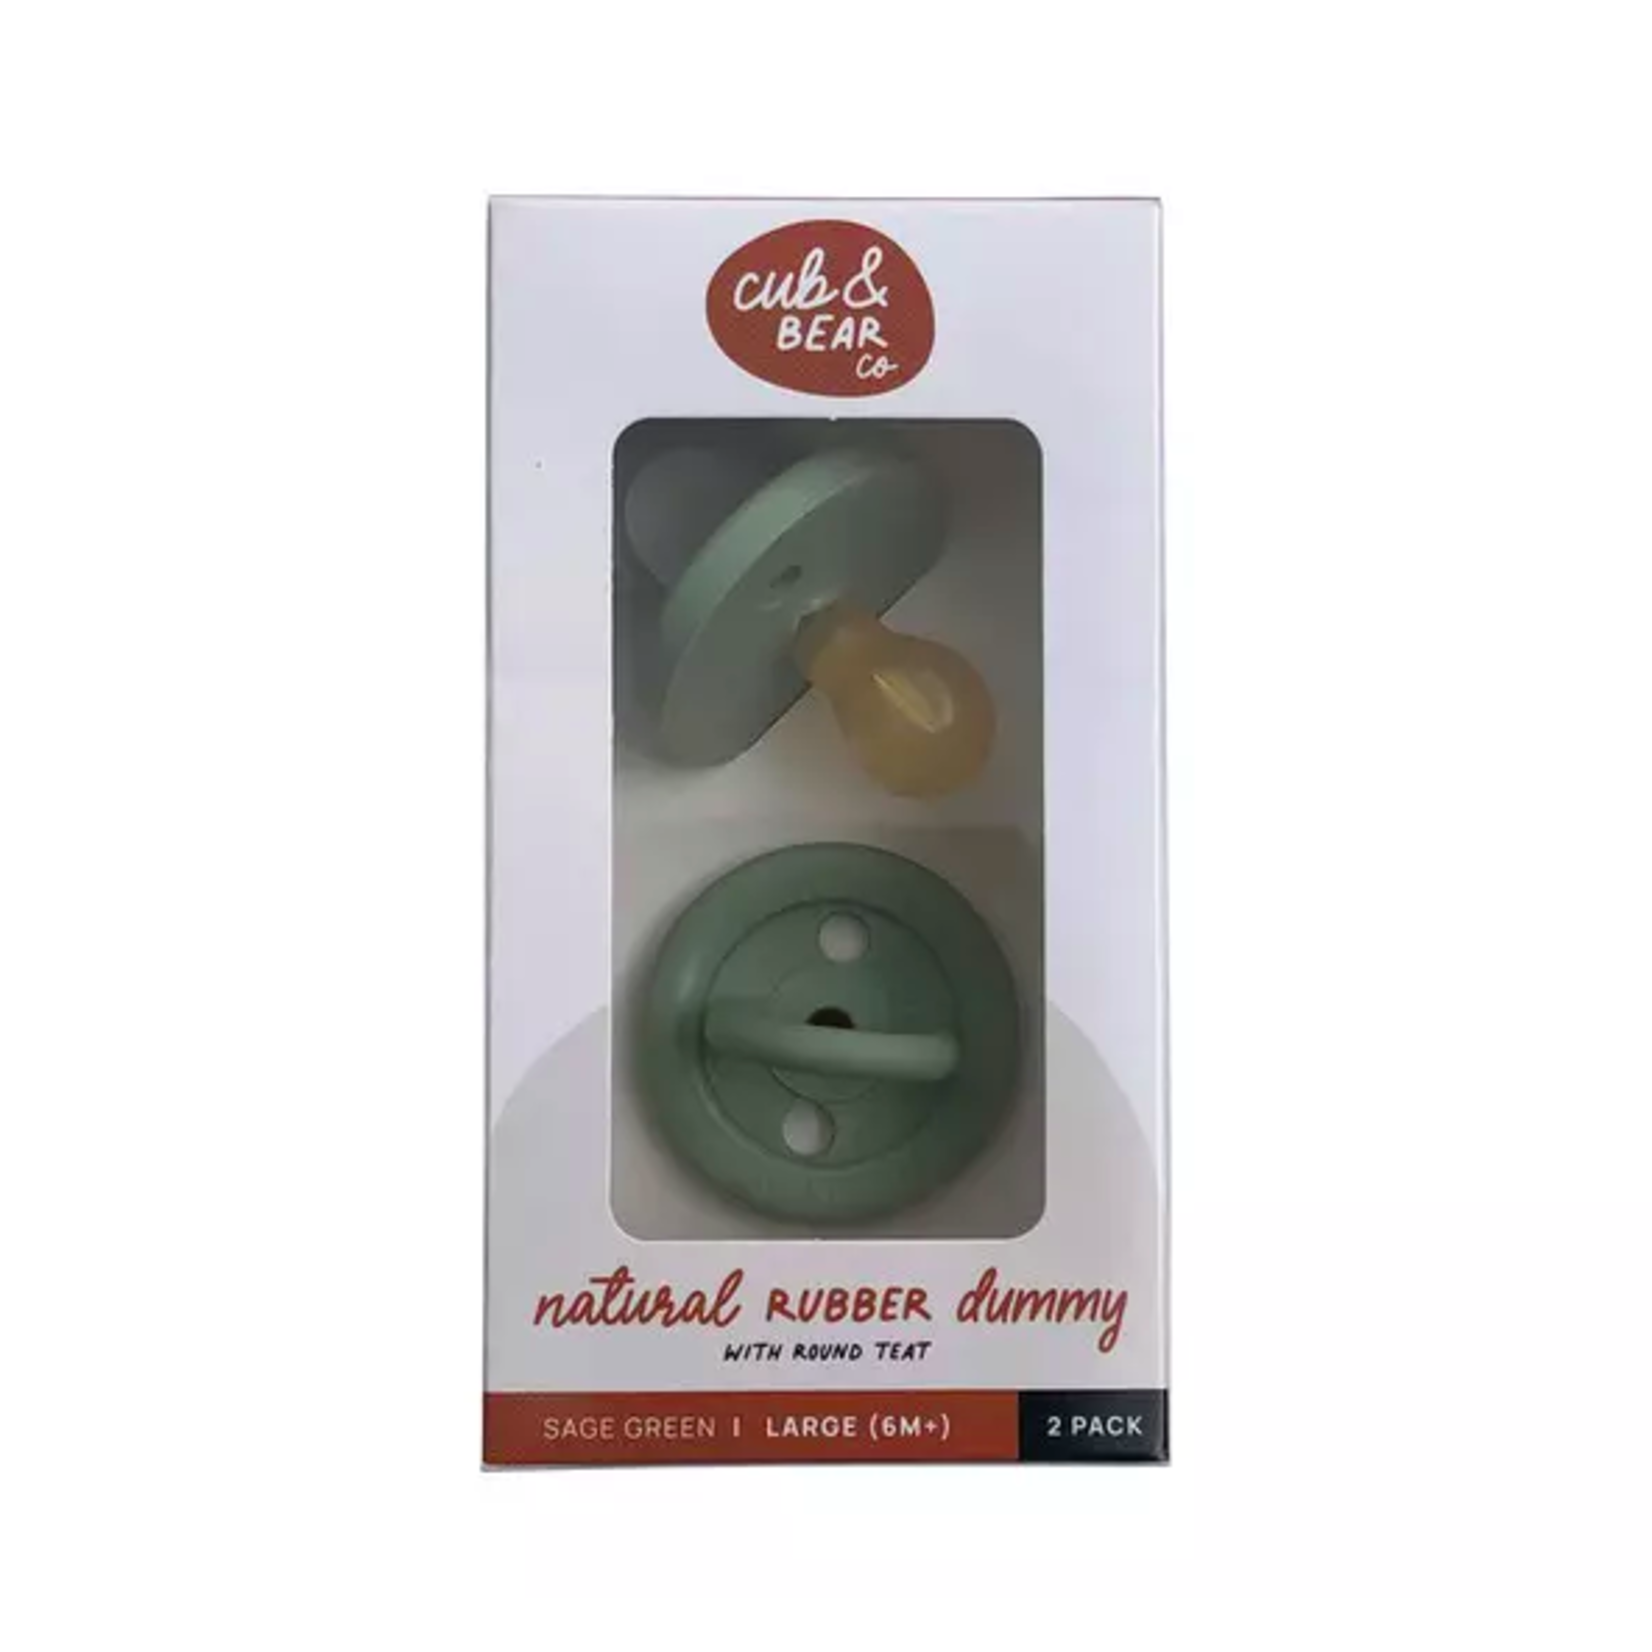 Cub & Bear Co Cub & Bear Co Natural Rubber Dummy Round Teat Twin Pack Sage Green